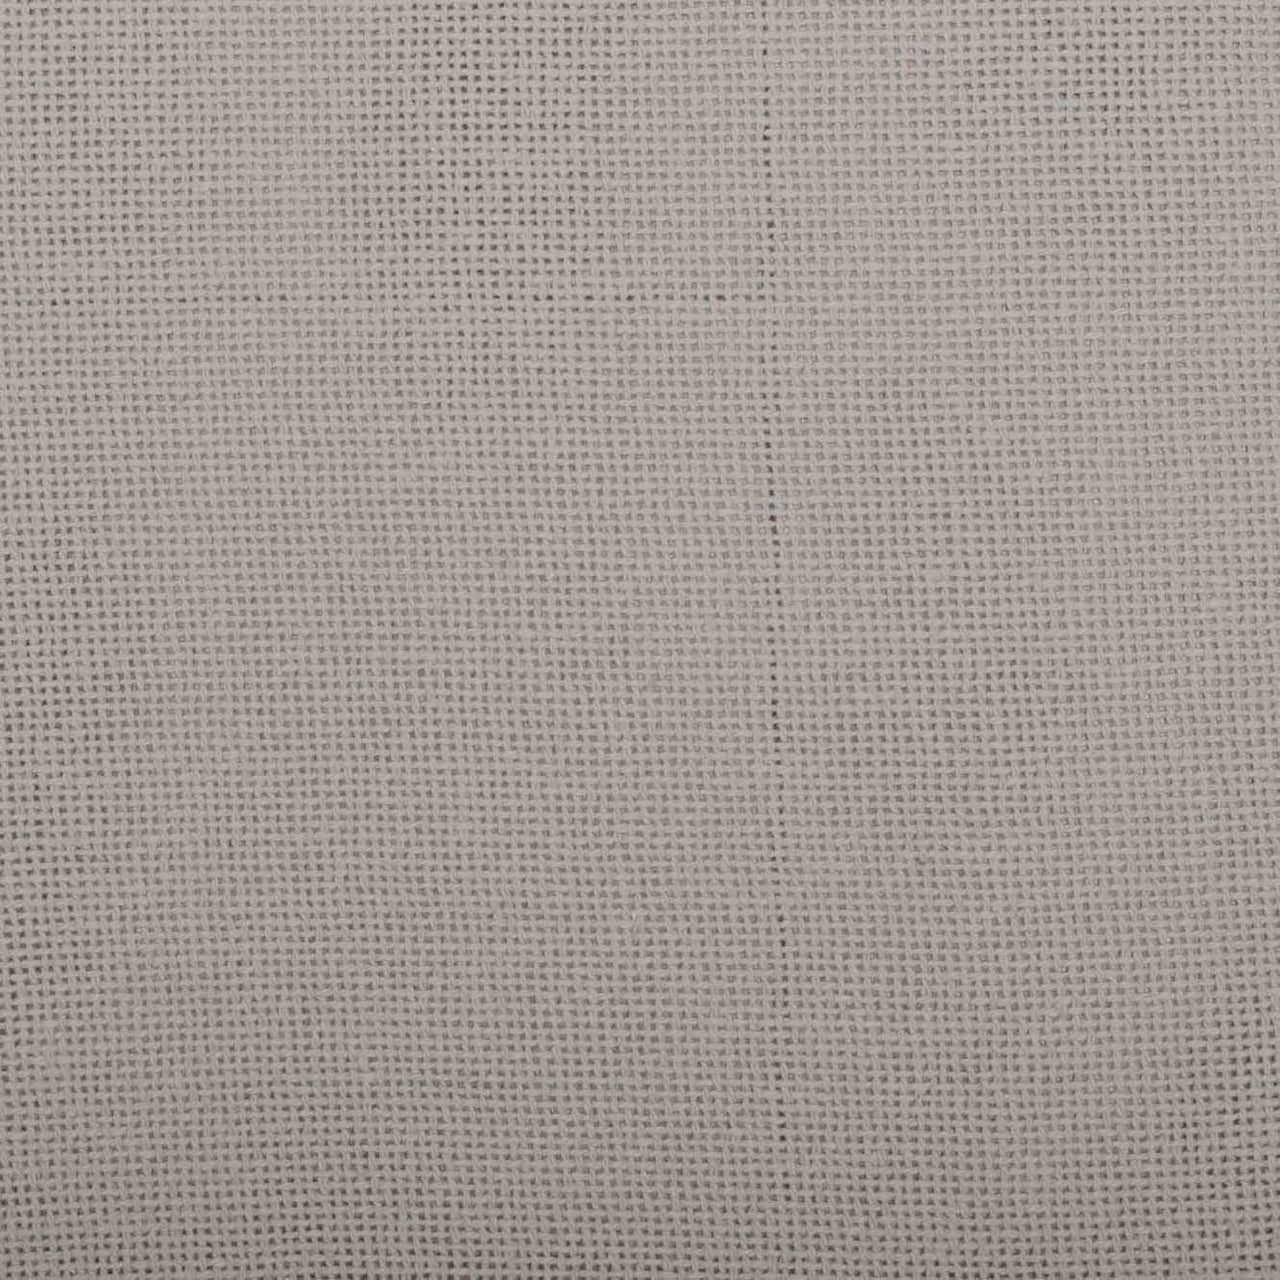 Burlap Dove Grey Fringed King Bed Skirt 78x80x16 VHC Brands